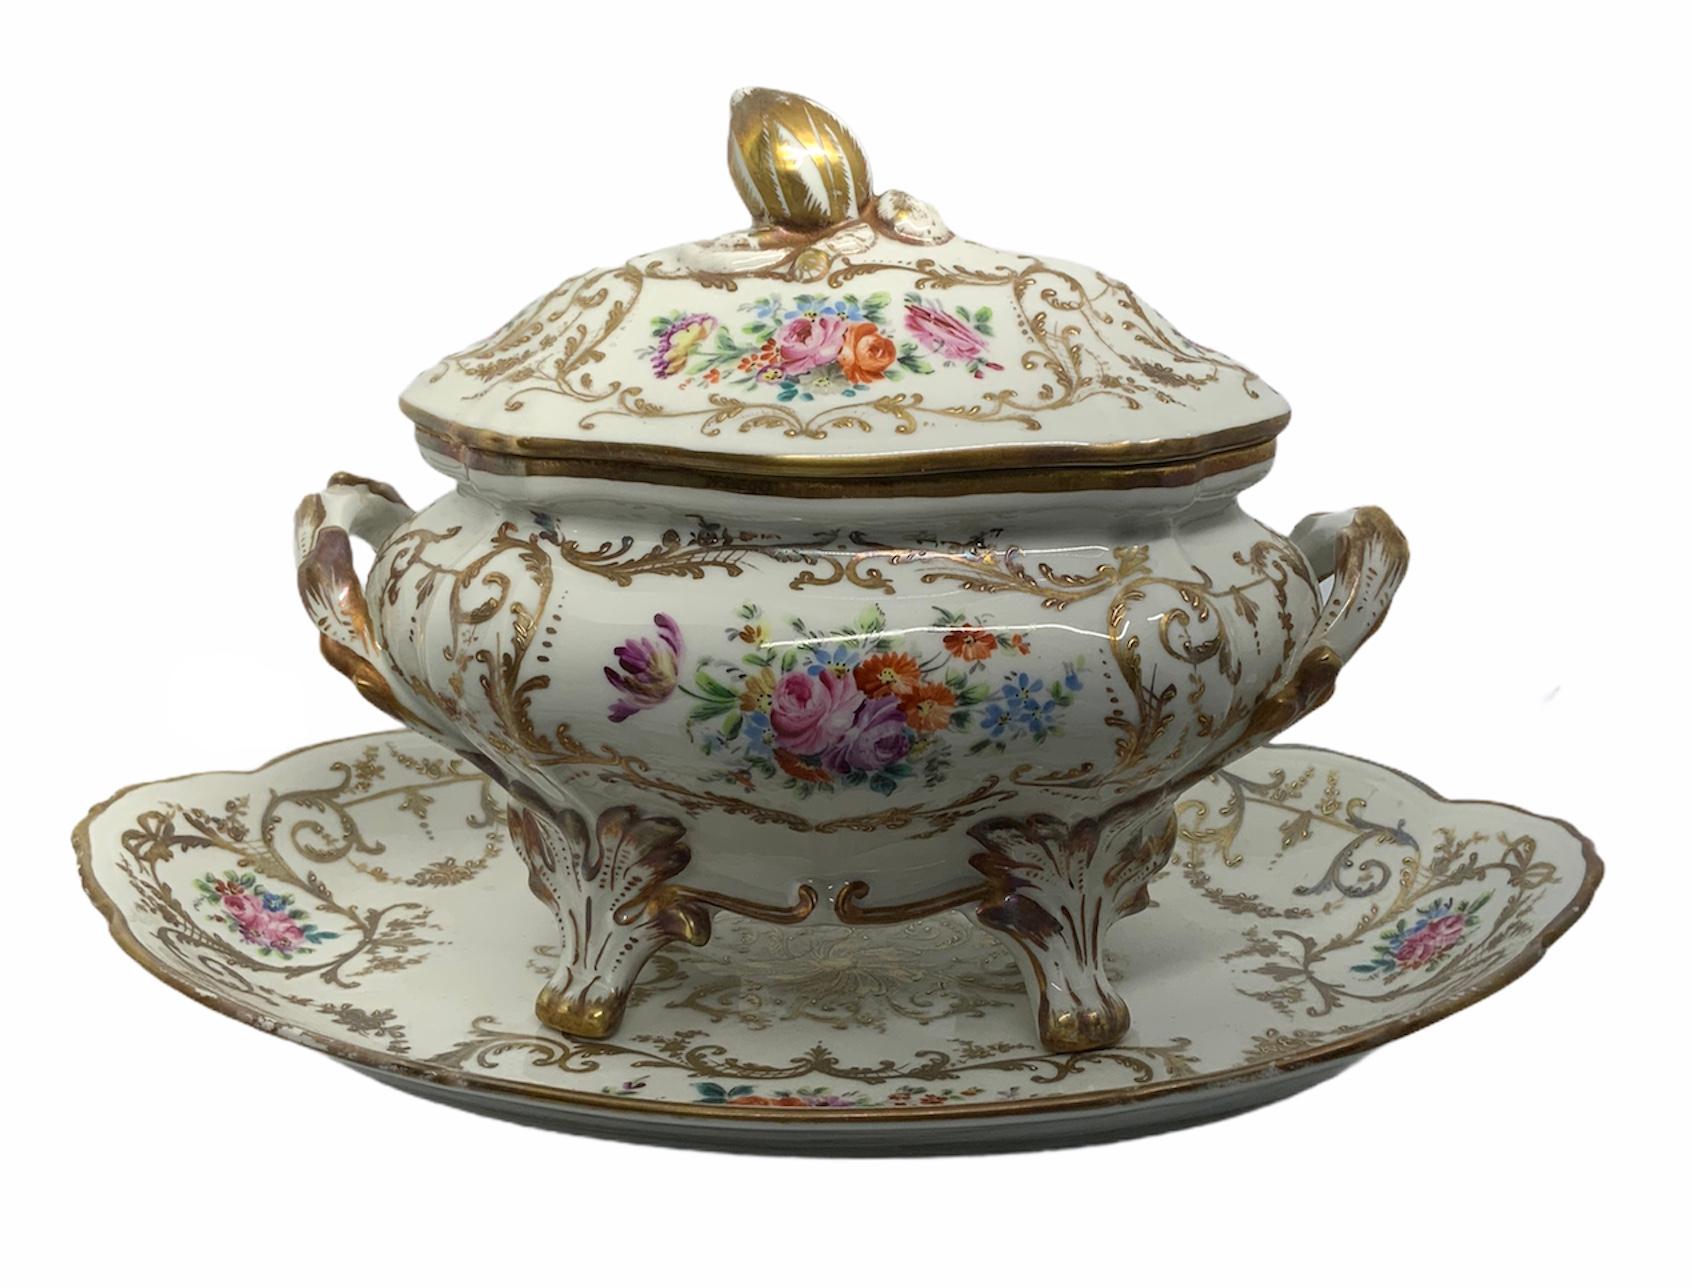 Hand-Painted Camille Le Tallec Handpainted Porcelain Tureen For Sale